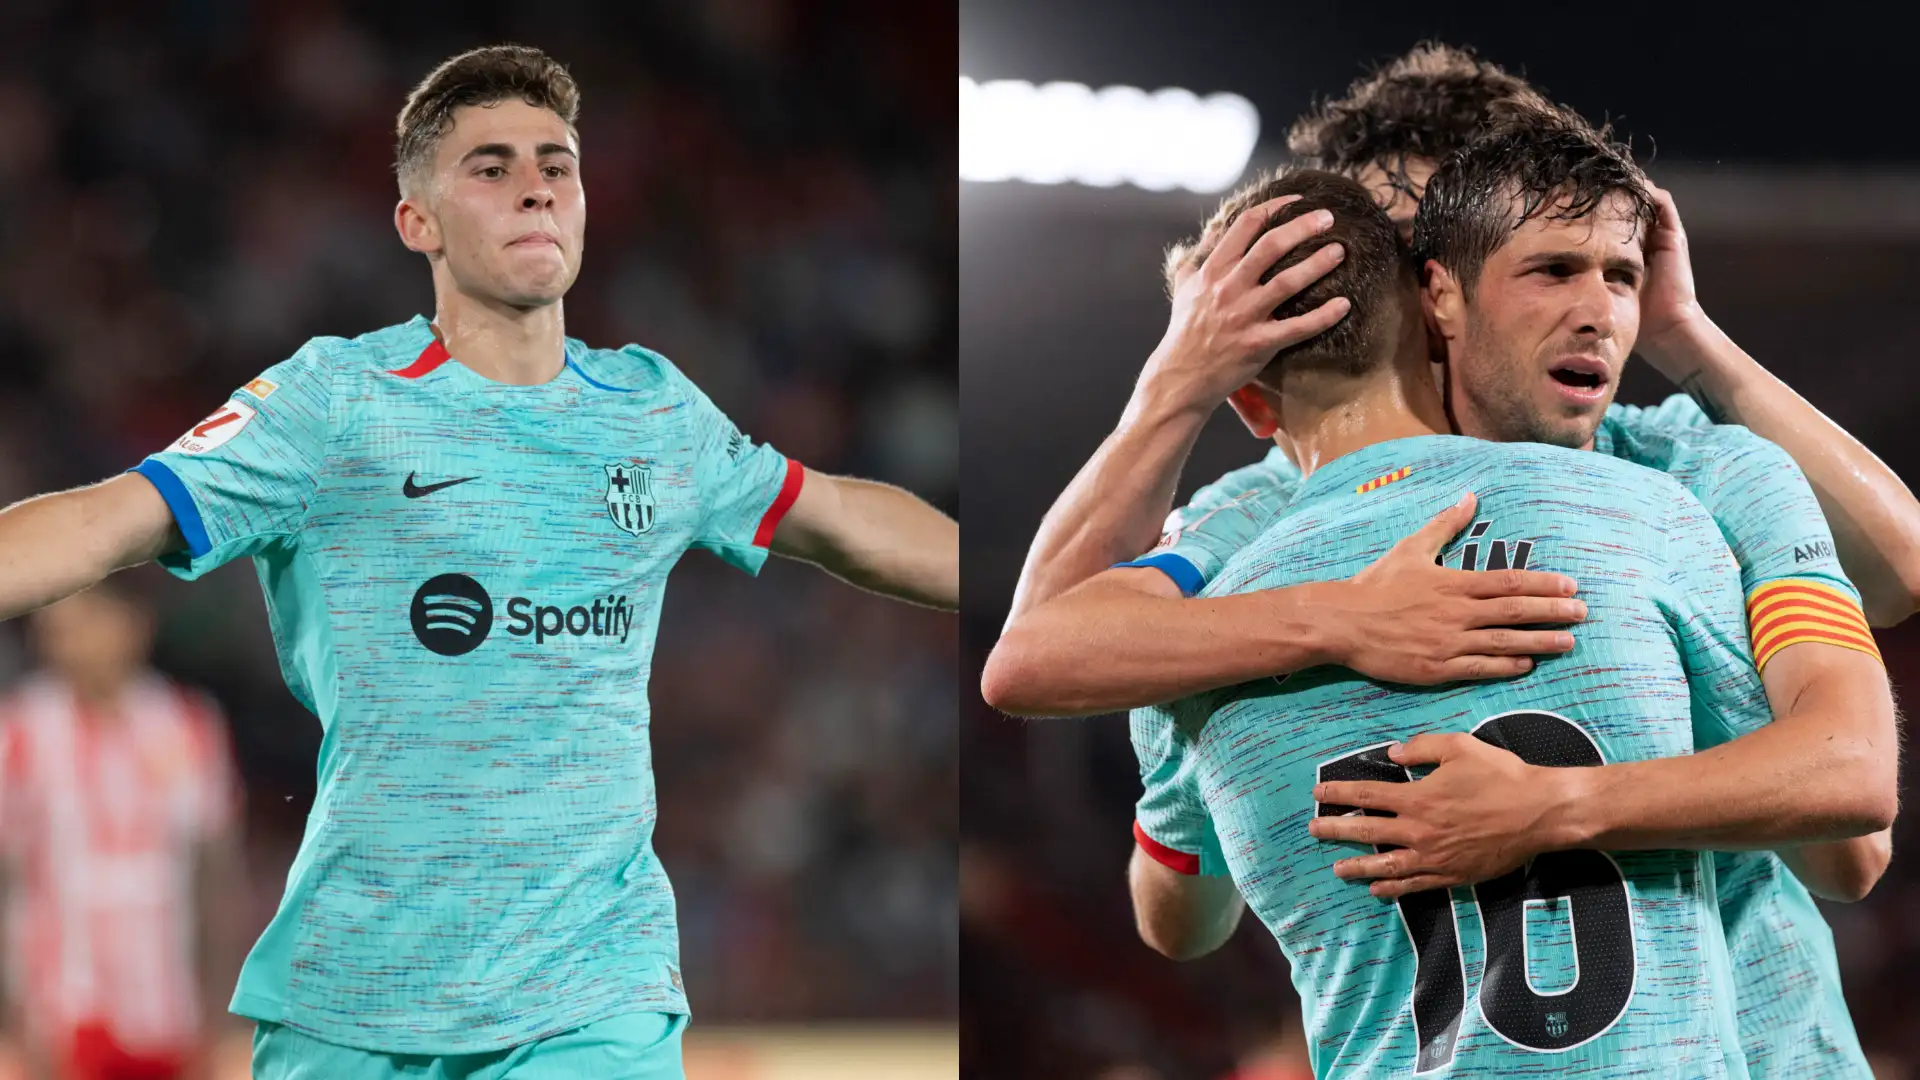 The 21-year-old scored twice in a slightly uneasy victory for Xavi's side against La Liga's bottom side. A Fermin Lopez saved an otherwise languid Barcelona, as the Catalonians sealed a win to all-but secure a second-placed finish in La Liga. The Blaugrana were poor for long stretches, but timely goals from the academy graduate set up a 2-0 victory. Barca's opener was made in La Masia. Hector Fort, in for the inconsistent Joao Cancelo, whipped a cross to the back post, which Lopez dutifully nodded home. Xavi's side were hardly secure in their led, though. Pau Cubarsi was called on to make a number of last-ditch tackles, while a better effort from Leo Baptistao in a one-on-one would have given the home side an equaliser. Adrian Embarba followed his effort by cracking a shot off the post on the stroke of half time. The Blaugrana fortune continued after the break. Anthony Lozano opened the second half by missing a sitter. And they were made to pay, with Lopez making an impact again. The Barca youth product darted into the box to meet a Sergi Roberto cross in stride to double the Blaugrana advantage. It was an otherwise comfortable night for Xavi's side, who have admittedly little to play for at this point. GOAL rates Barcelona's players from the Estadio Mediterraneo... Article continues below Marc-Andre ter StegenGetty Goalkeeper & Defence Marc-Andre ter Stegen (6/10): Made a couple of impressive stops in the first half. Was lucky that Almeria missed a lot. A very strange clean sheet to keep. Jules Kounde (8/10): Impressive at the back; made his challenges and won his duels. Much better going forward, too, creating a handful of chances. Looked tired after an hour. Pau Cubarsi (8/10): Threw in some impressive - if rather reckless - tackles. Played some outrageous - if rather risky - passes. Inigo Martinez (6/10): Given another look, and turned in a mixed showing. His far younger partner looked more comfortable. Hector Fort (7/10): Played a wonderful cross to set up the opener, and was steady throughout. Probably deserves more minutes going forward. Advertisement NEXT MATCHES LaLiga BARCELONA Barcelona 19 May 2024 18:00 RAYO VALLECANO Rayo Vallecano Match Preview LaLiga MALLORCA Mallorca 19 May 2024 18:00 ALMERIA Almeria Match Preview Fermin Lopez Barcelona AlmeriaGetty Midfield Sergi Roberto (6/10): Can't be faulted for his effort, but didn't hold down the middle very effectively. Looked much better when going forward, and produced a nice assist for Lopez. Pedri (5/10): Floated around, played some lovely passes, but was rather lackadaisical on the ball at times. Not the kind of shift you'd expect from a player who will want to start at Euro 2024 for Spain. Fermin Lopez (8/10): Took the opening goal well. Made the second look even better. Wasn't on the ball a lot, but he patrolled space with aplomb. Lamine Yamal Barcelona AlmeriaGetty Attack Lamine Yamal (7/10): Did some outrageous things with the ball, and was a threat - as usual. His impact waned as the game wore on, though. Robert Lewandowski (5/10): Had three shots, but none of them were particularly clear. Puzzling that he started; Barca have nothing to play for here. Ferran Torres (5/10): Didn't do much to take advantage of the opportunity afforded to him on the left. Better off the bench. Xavi Barcelona 2023-24Getty Subs & Manager Joao Felix (4/10): Given 30 minutes to impress. Missed an easy chance and was overall disappointing. Andreas Christensen (5/10): Held down the centre and kept it simple. Vitor Roque (5/10): Surprising that he's alive. Ran a lot, got booked, looked generally frustrated. Joao Cancelo (N/A): No time to make an impact. Oriol Romeu (N/A): No time to make an impact. Xavi (7/10): Rotated a bit, giving Fort a look, and also offering chances to Torres and Lopez. Barca were really leaky for some stretches, but scored some good goals and will take the win.